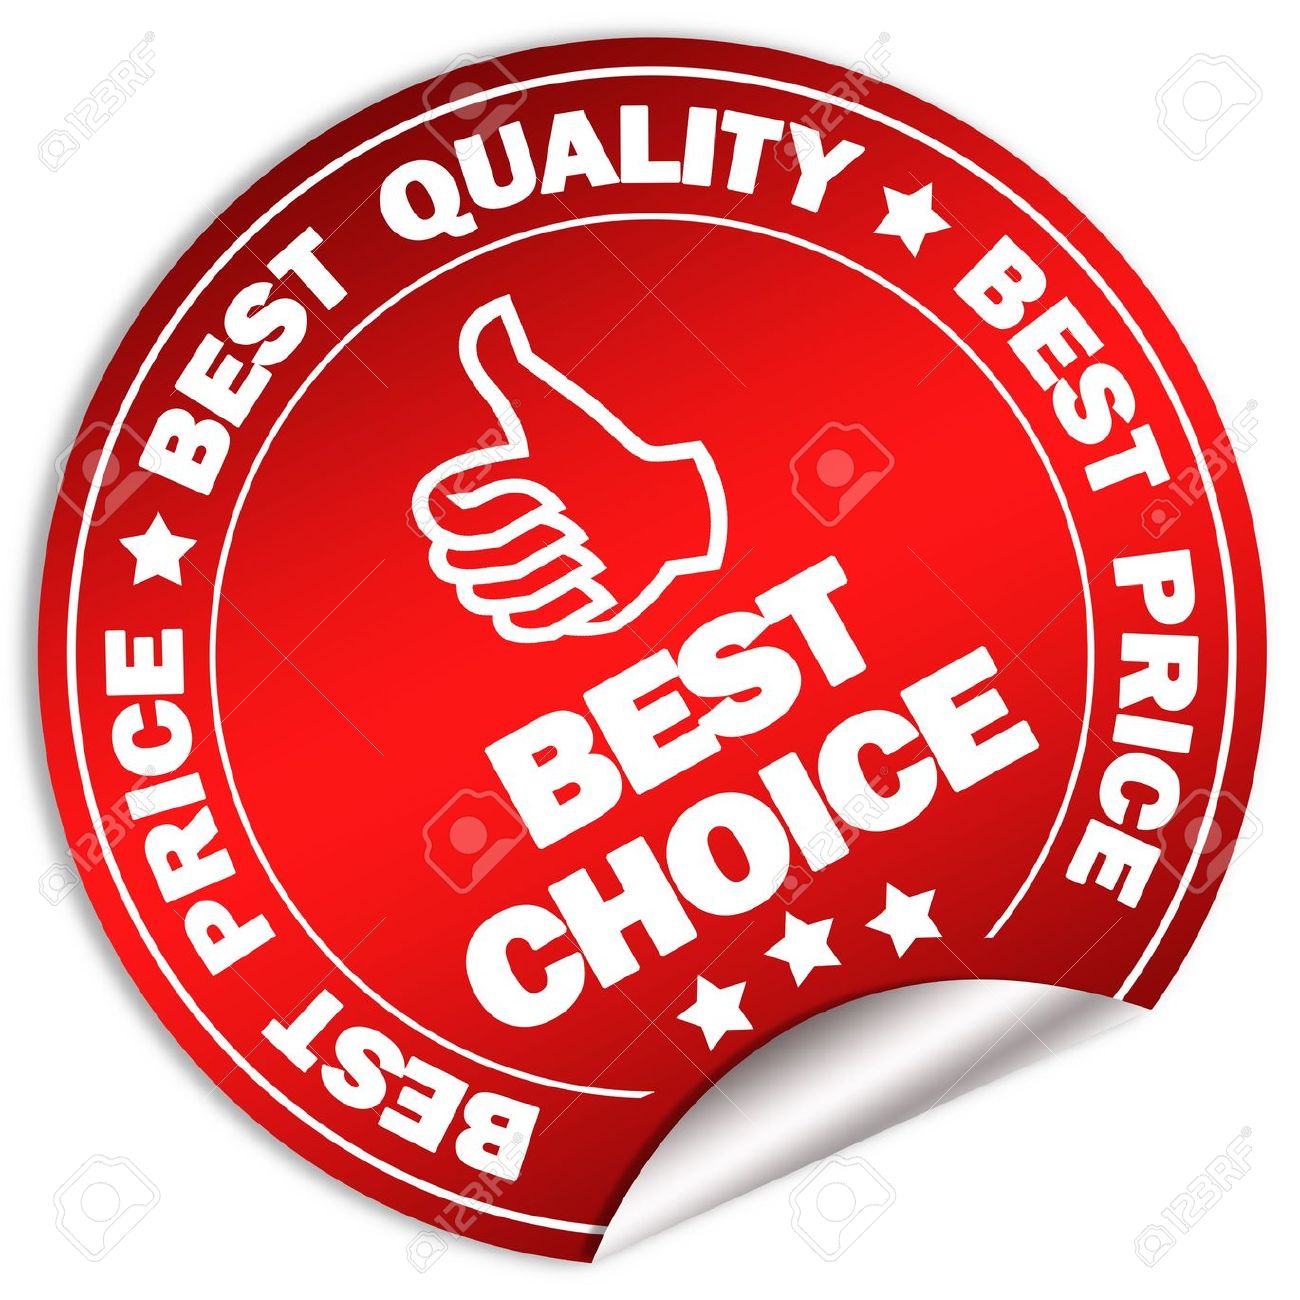 6355748-Best-choice-label-Stock-Photo-quality-best-good